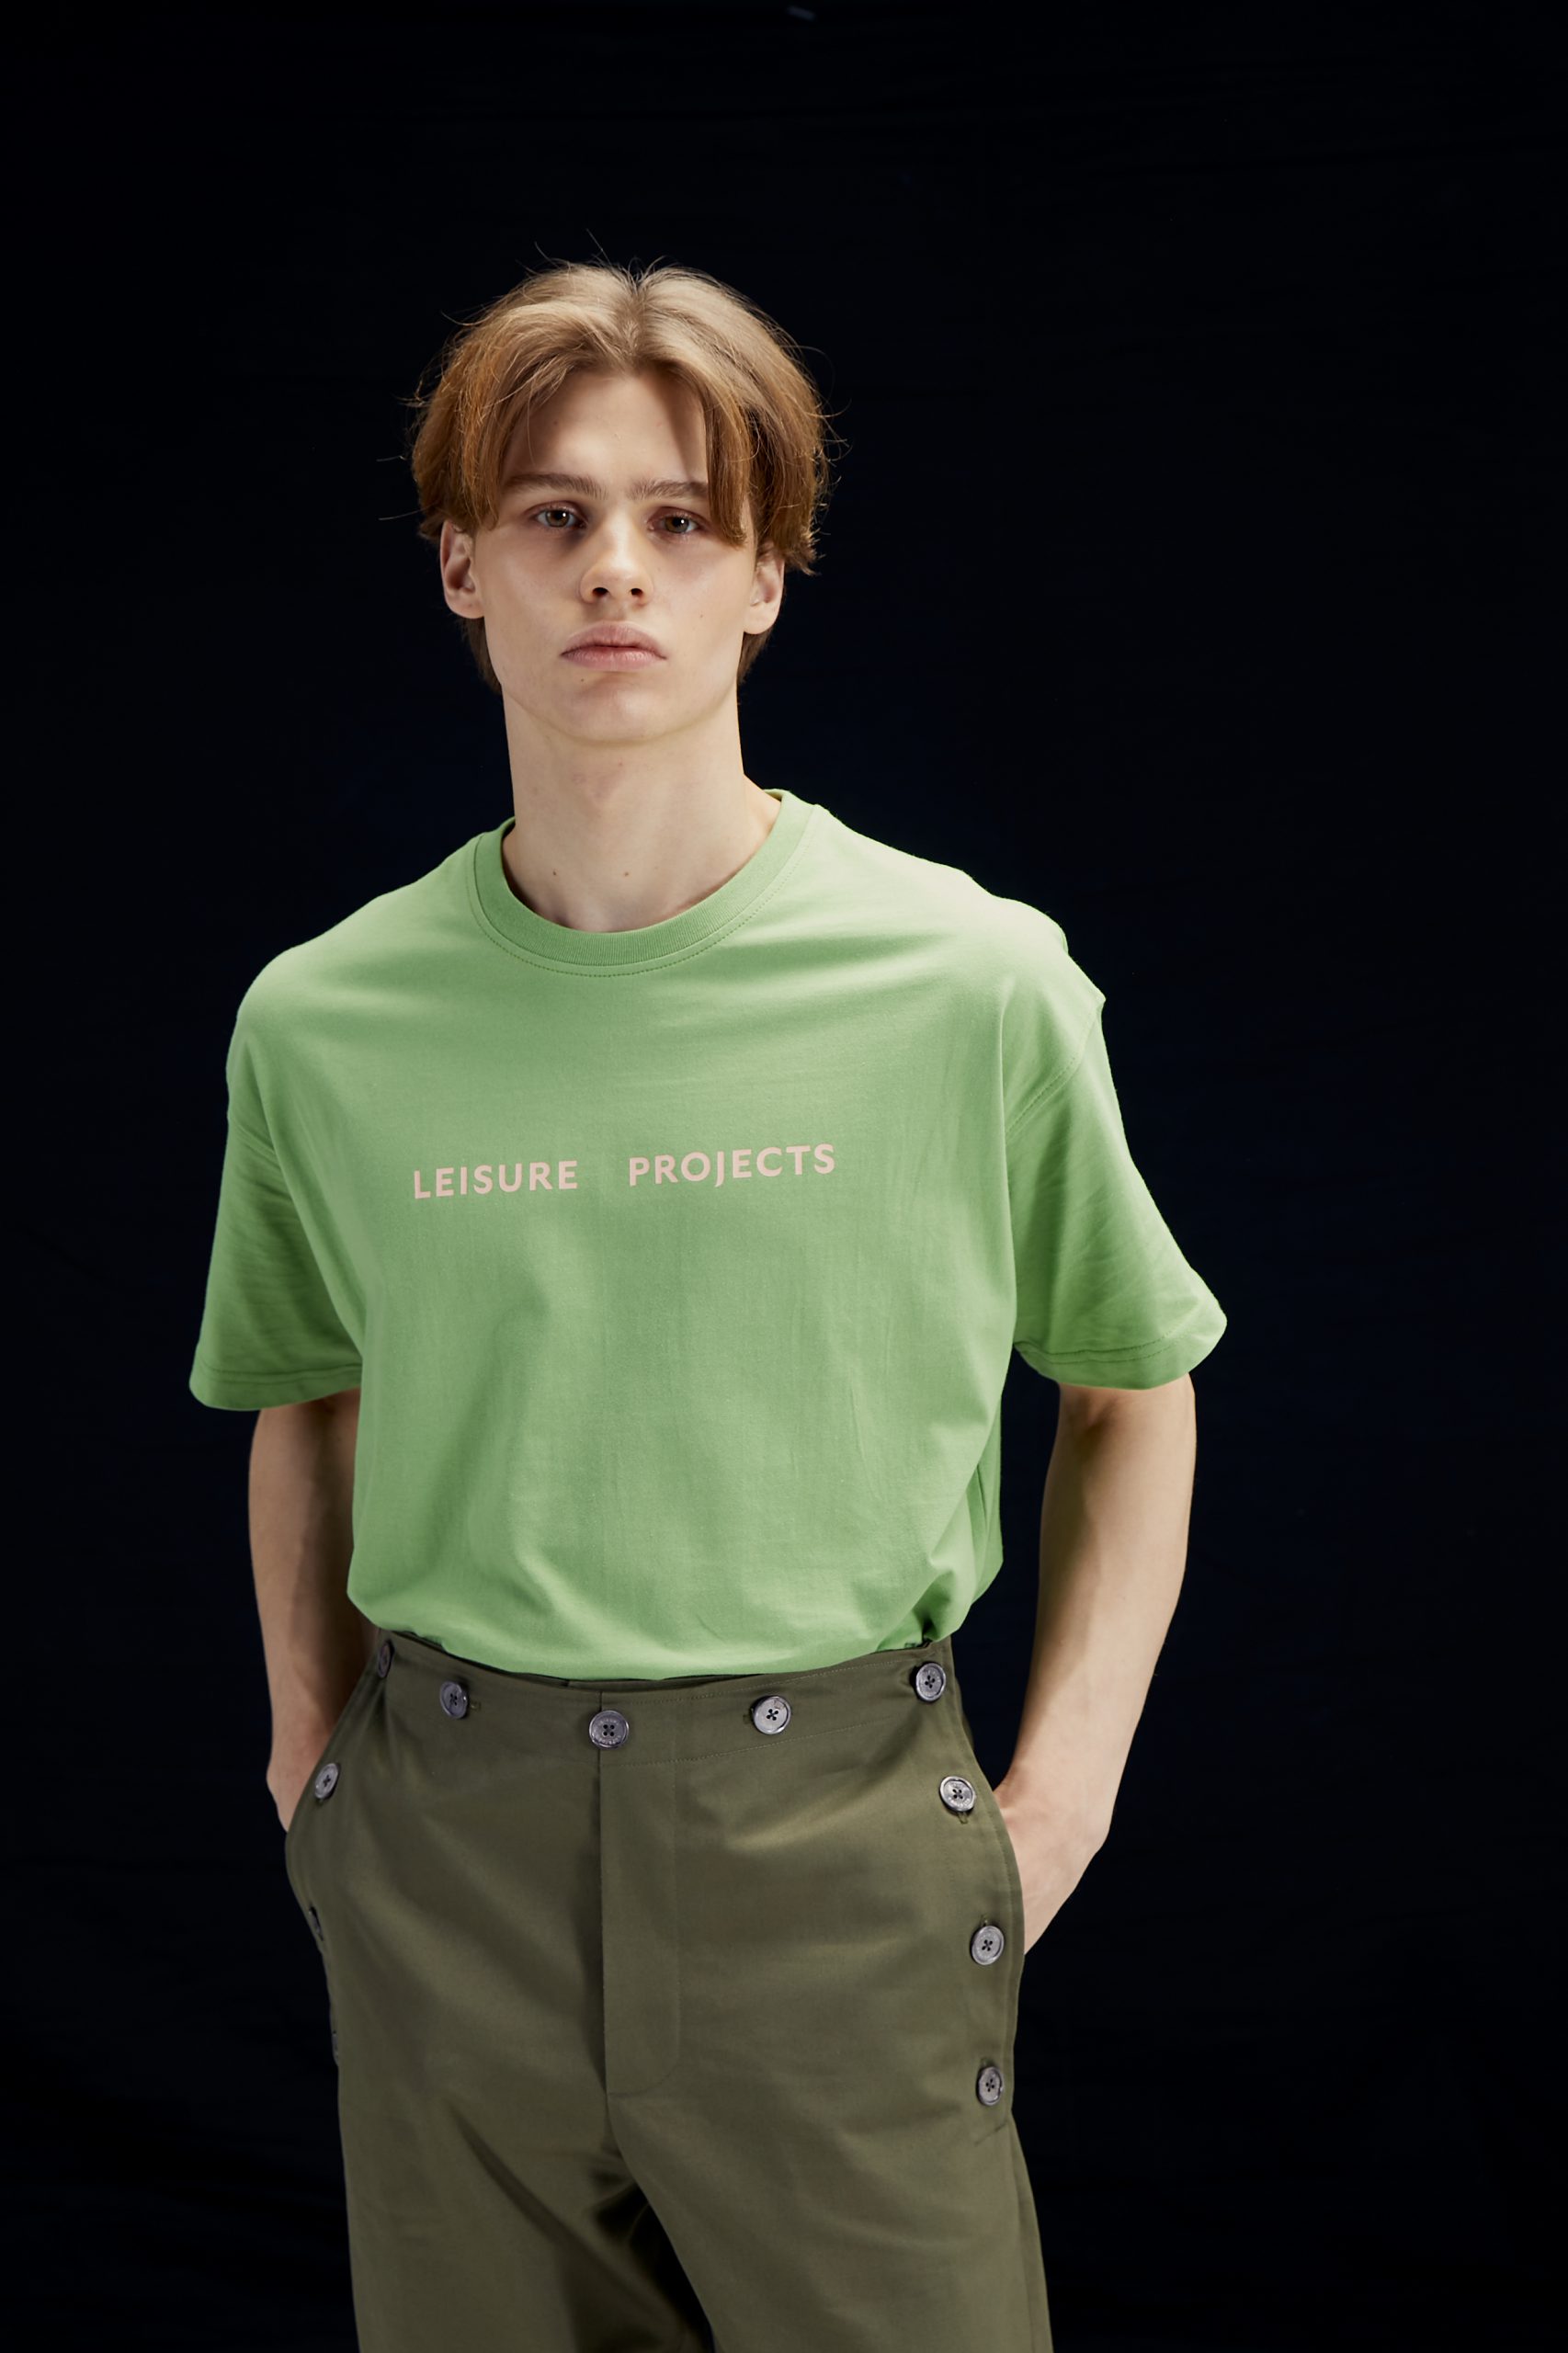 LEISURE PROJECTS OVERSIZE T-SHIRT - Leisure Projects